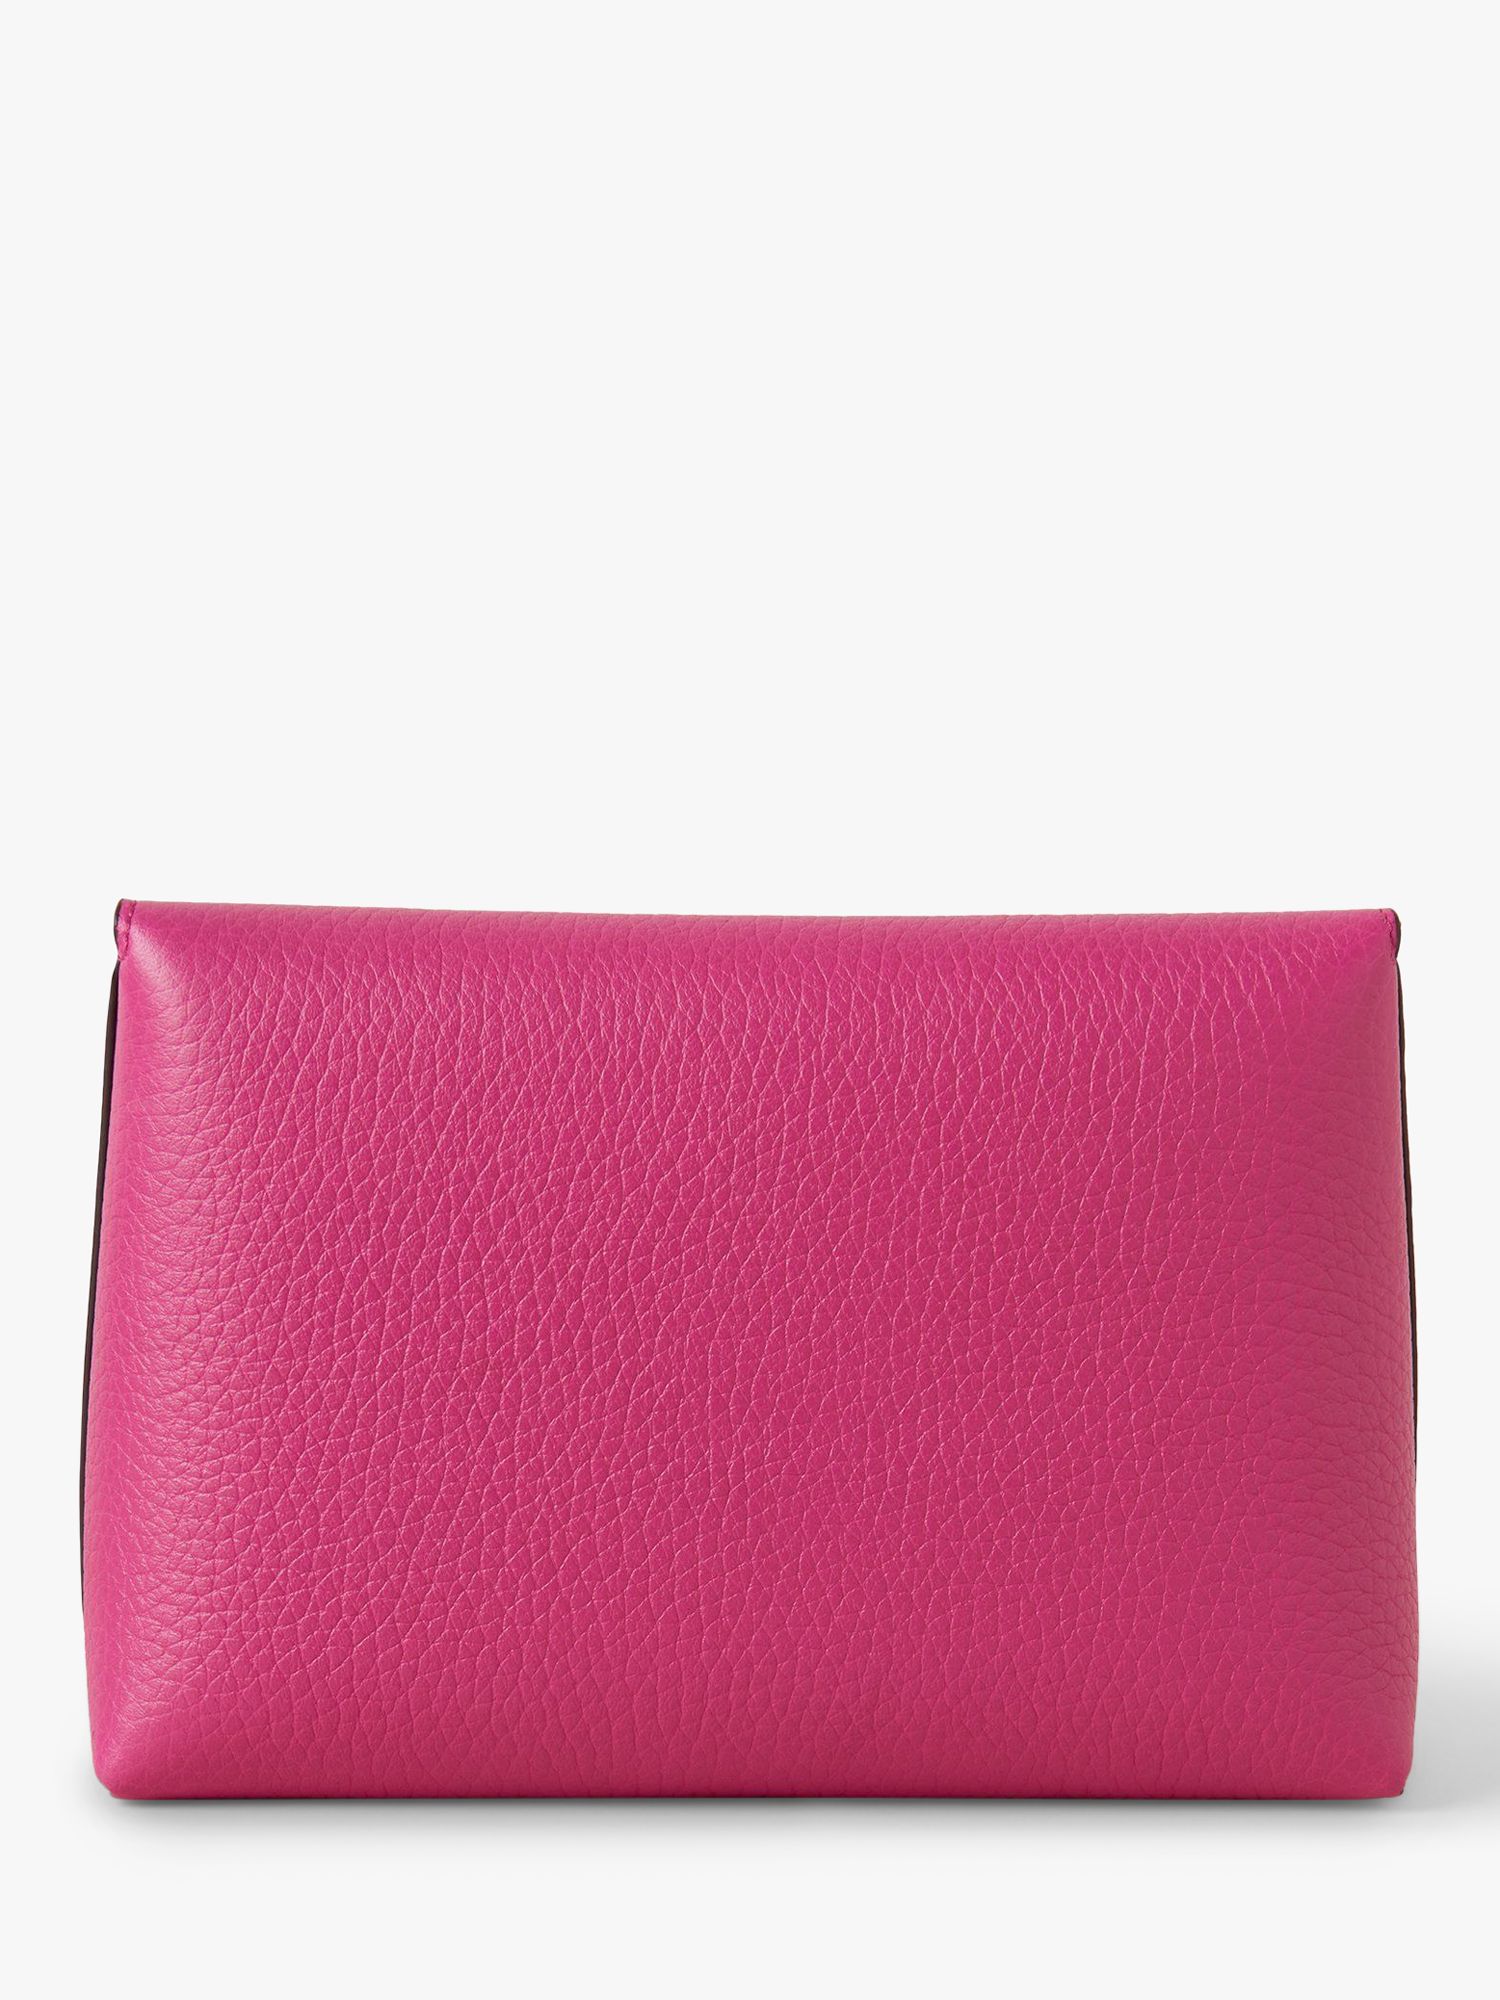 Mulberry Darley Heavy Grain Leather Small Cosmetic Pouch, Mulberry Pink ...